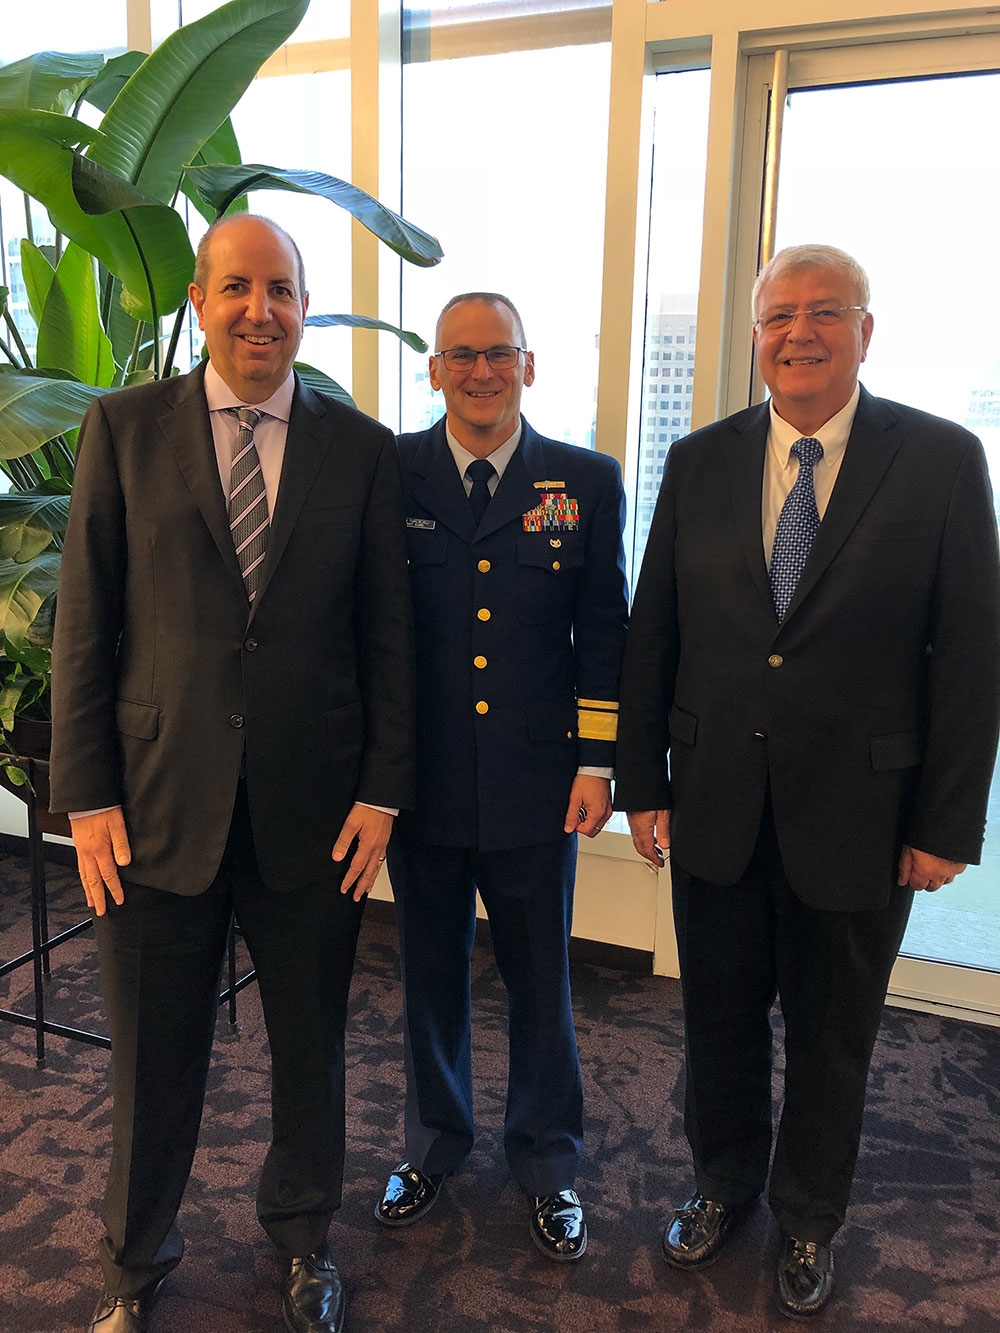 L-R: Mark Ross, Chairman of the ABS North American Regional Committee and President of Chevron Shipping; Admiral John Nadeau of the US Coast Guard and Tony Nassif, ABS Executive Vice President and Chief Operating Officer